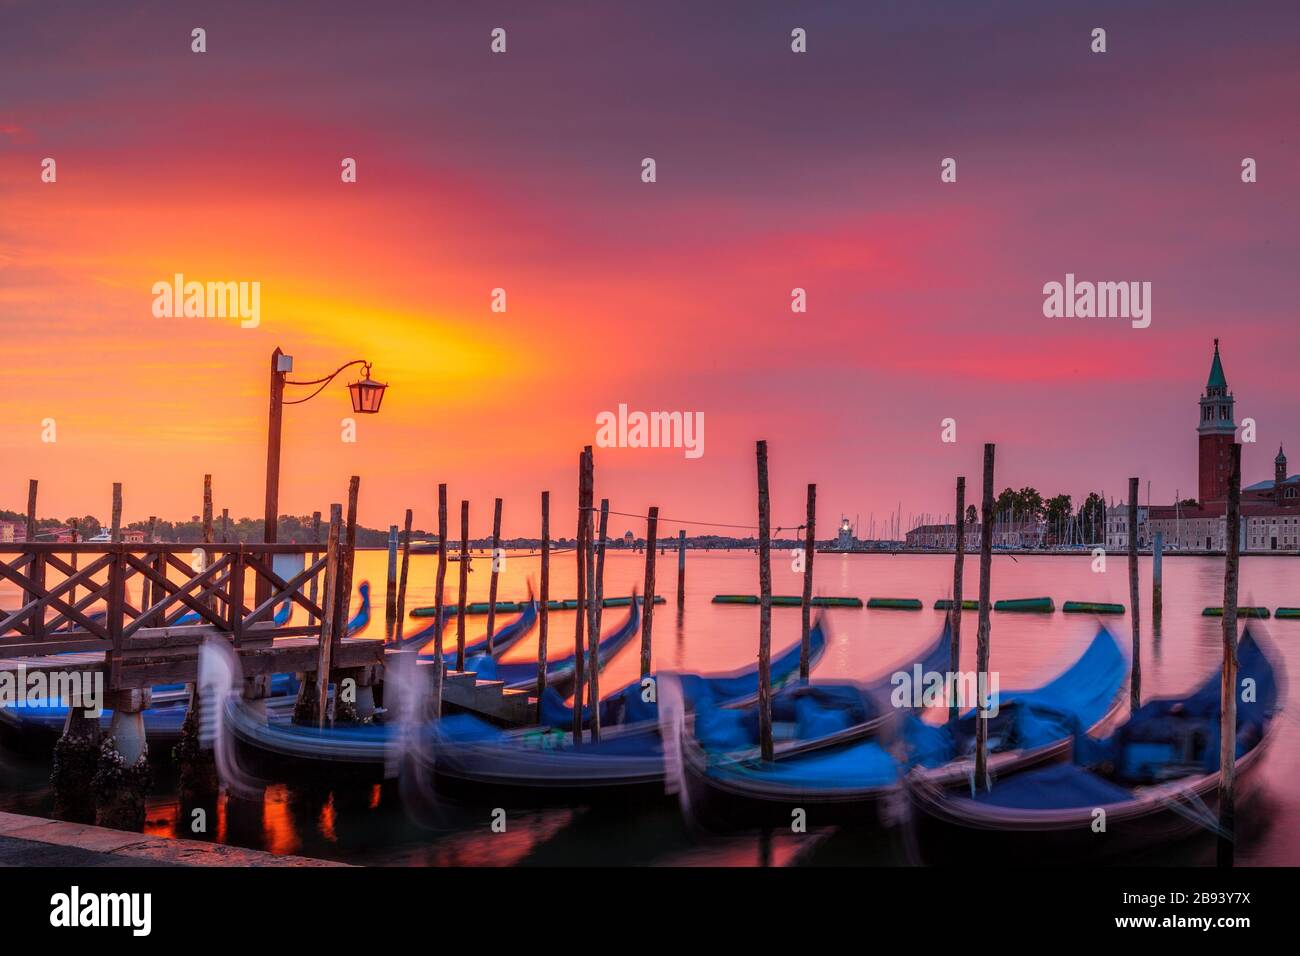 Dawn over the Grand Canal seen from St. Mark's Square in Venice, Italy.  Seen in the foreground are parked gondolas and in back is San Giorgio island Stock Photo